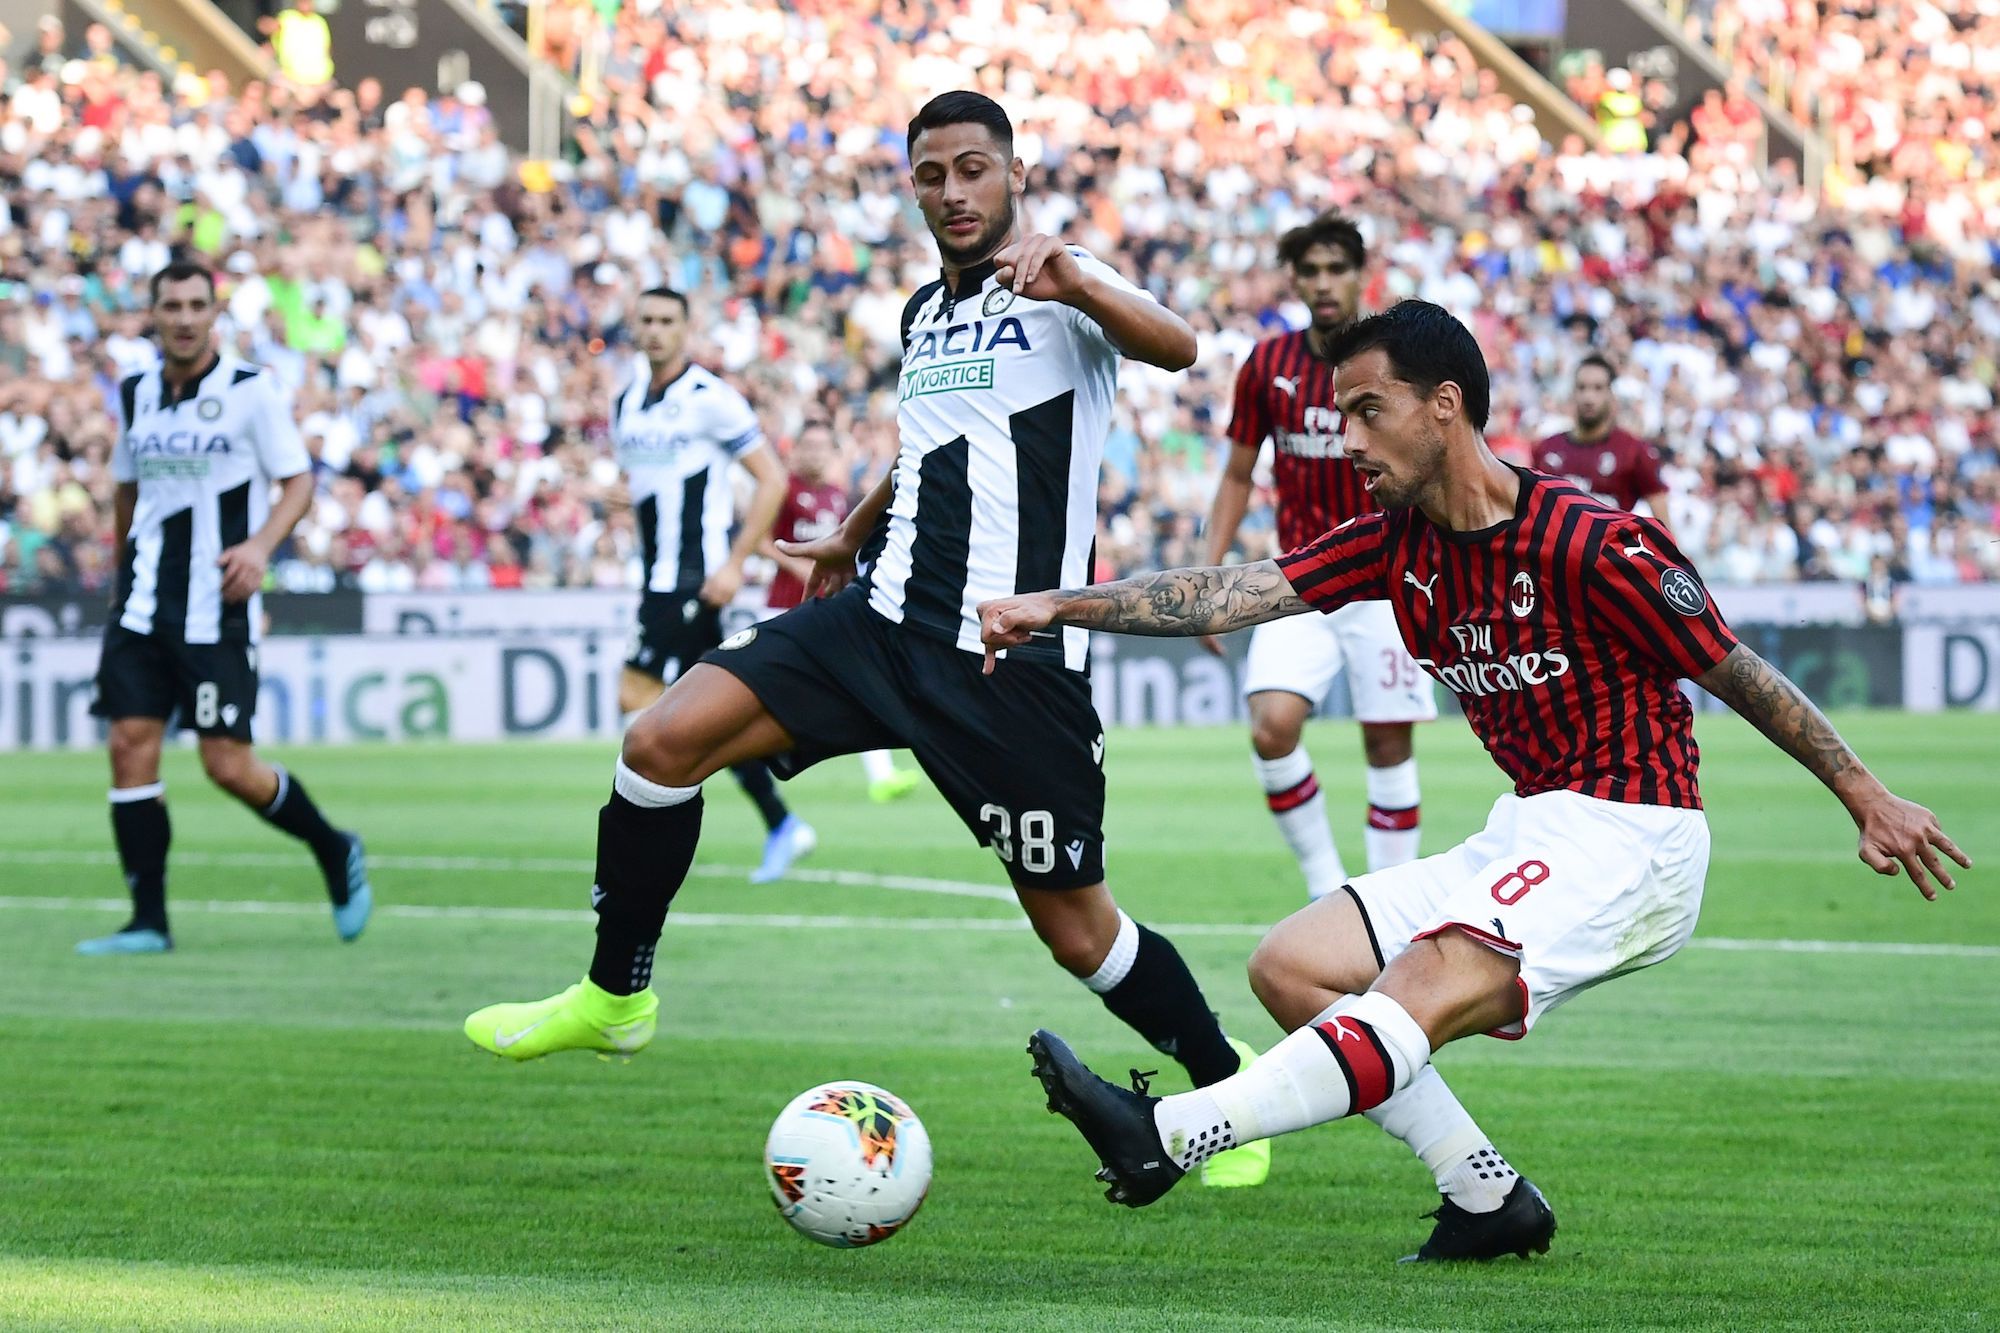 Udinese - AC Milan Live Stream & Odds for the Serie A Match | December 11